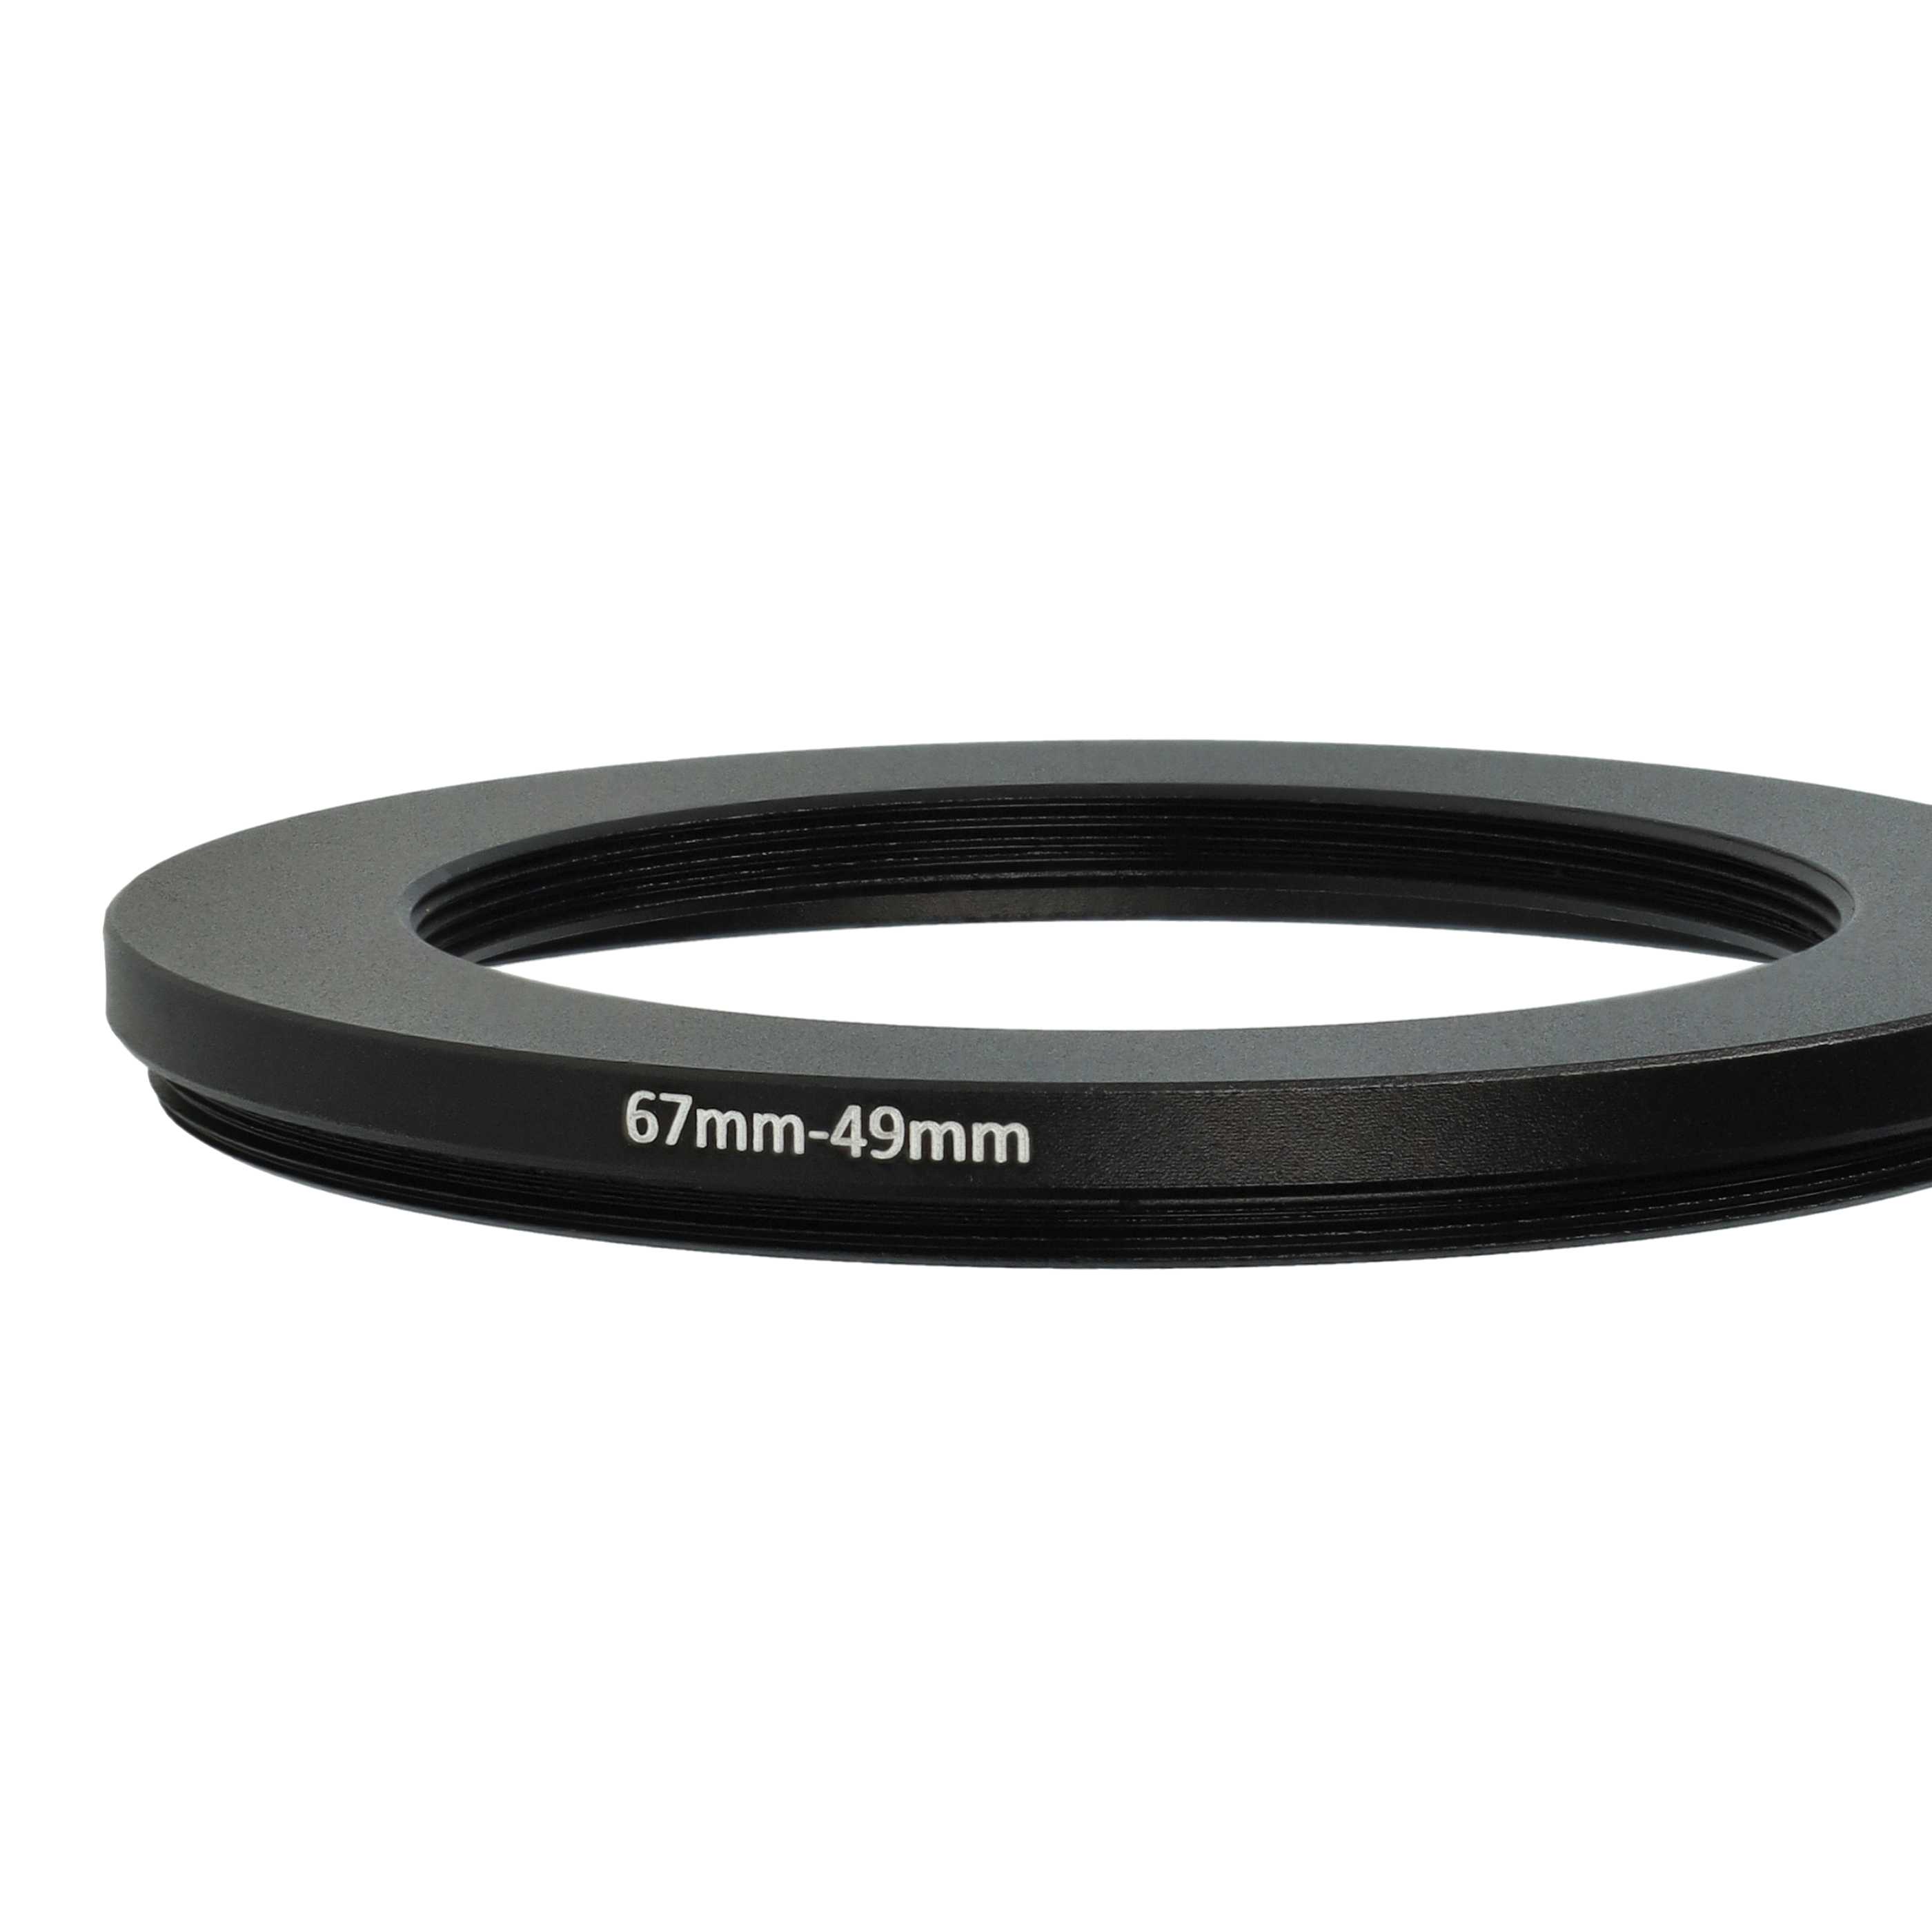 Step-Down Ring Adapter from 67 mm to 49 mm suitable for Camera Lens - Filter Adapter, metal